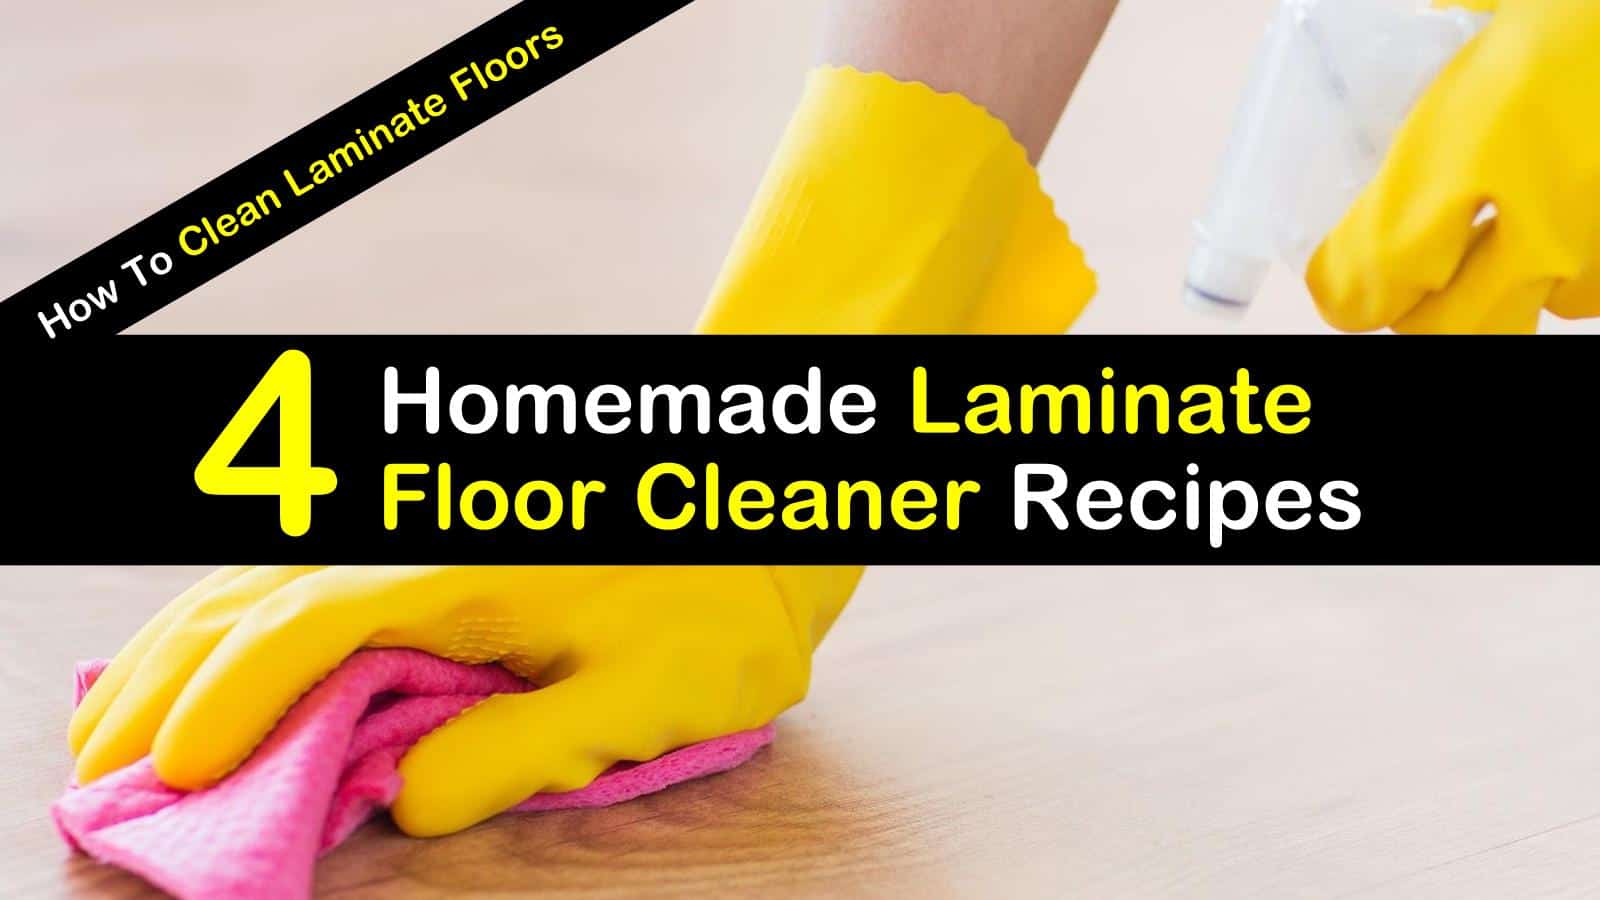 How To Clean Laminate Floors 4, Best Way To Clean Laminate Floors Naturally